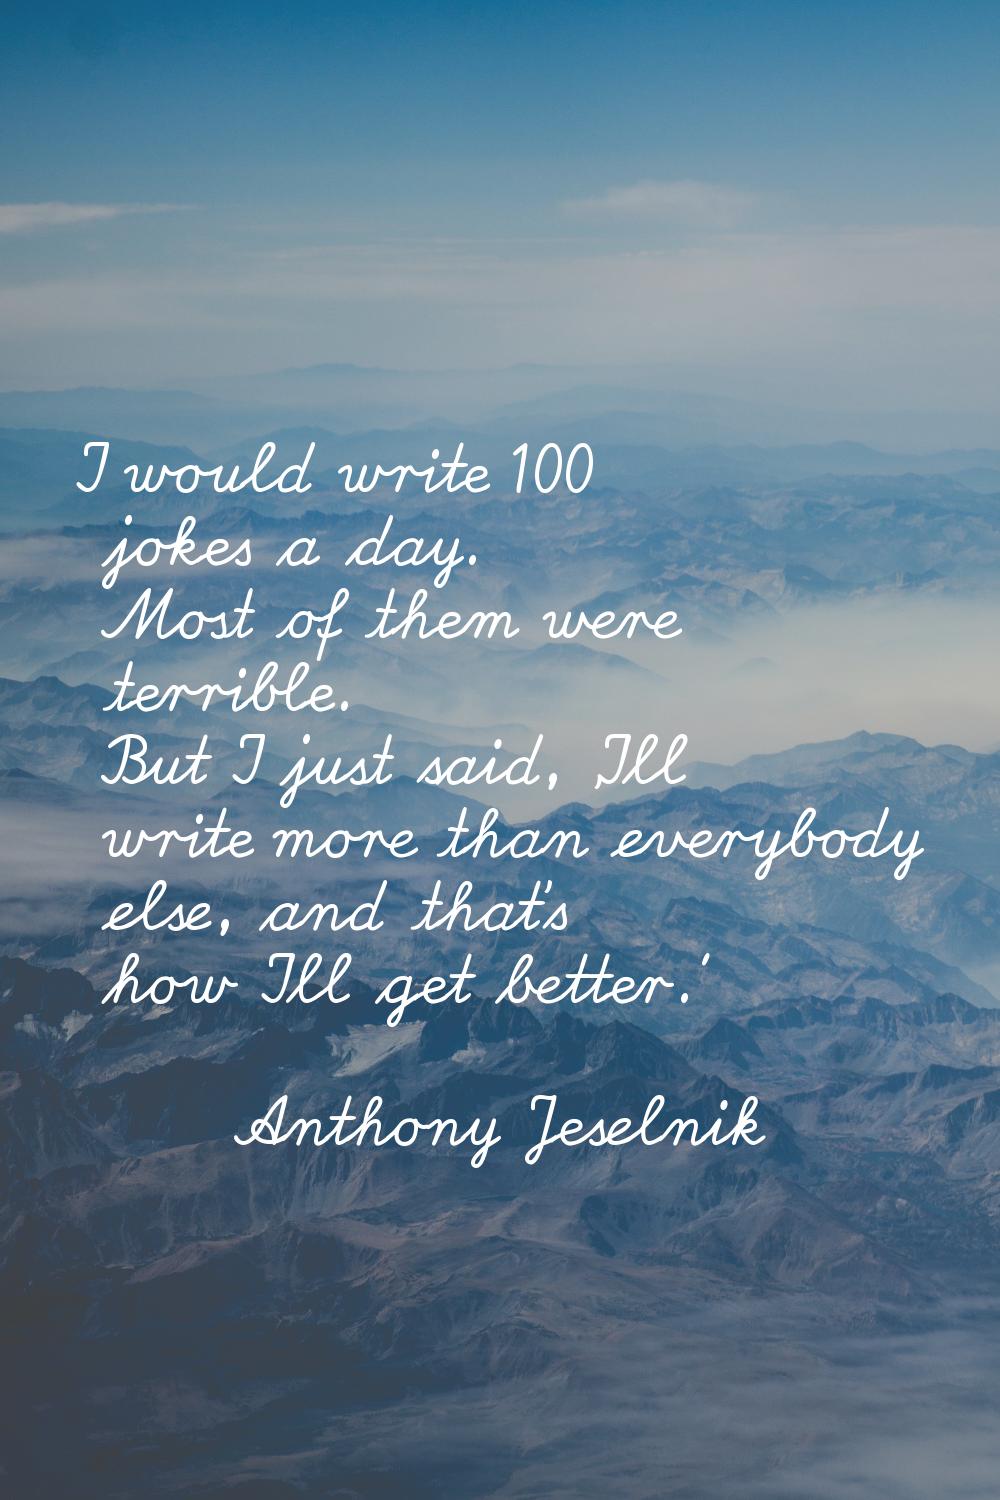 I would write 100 jokes a day. Most of them were terrible. But I just said, 'I'll write more than e